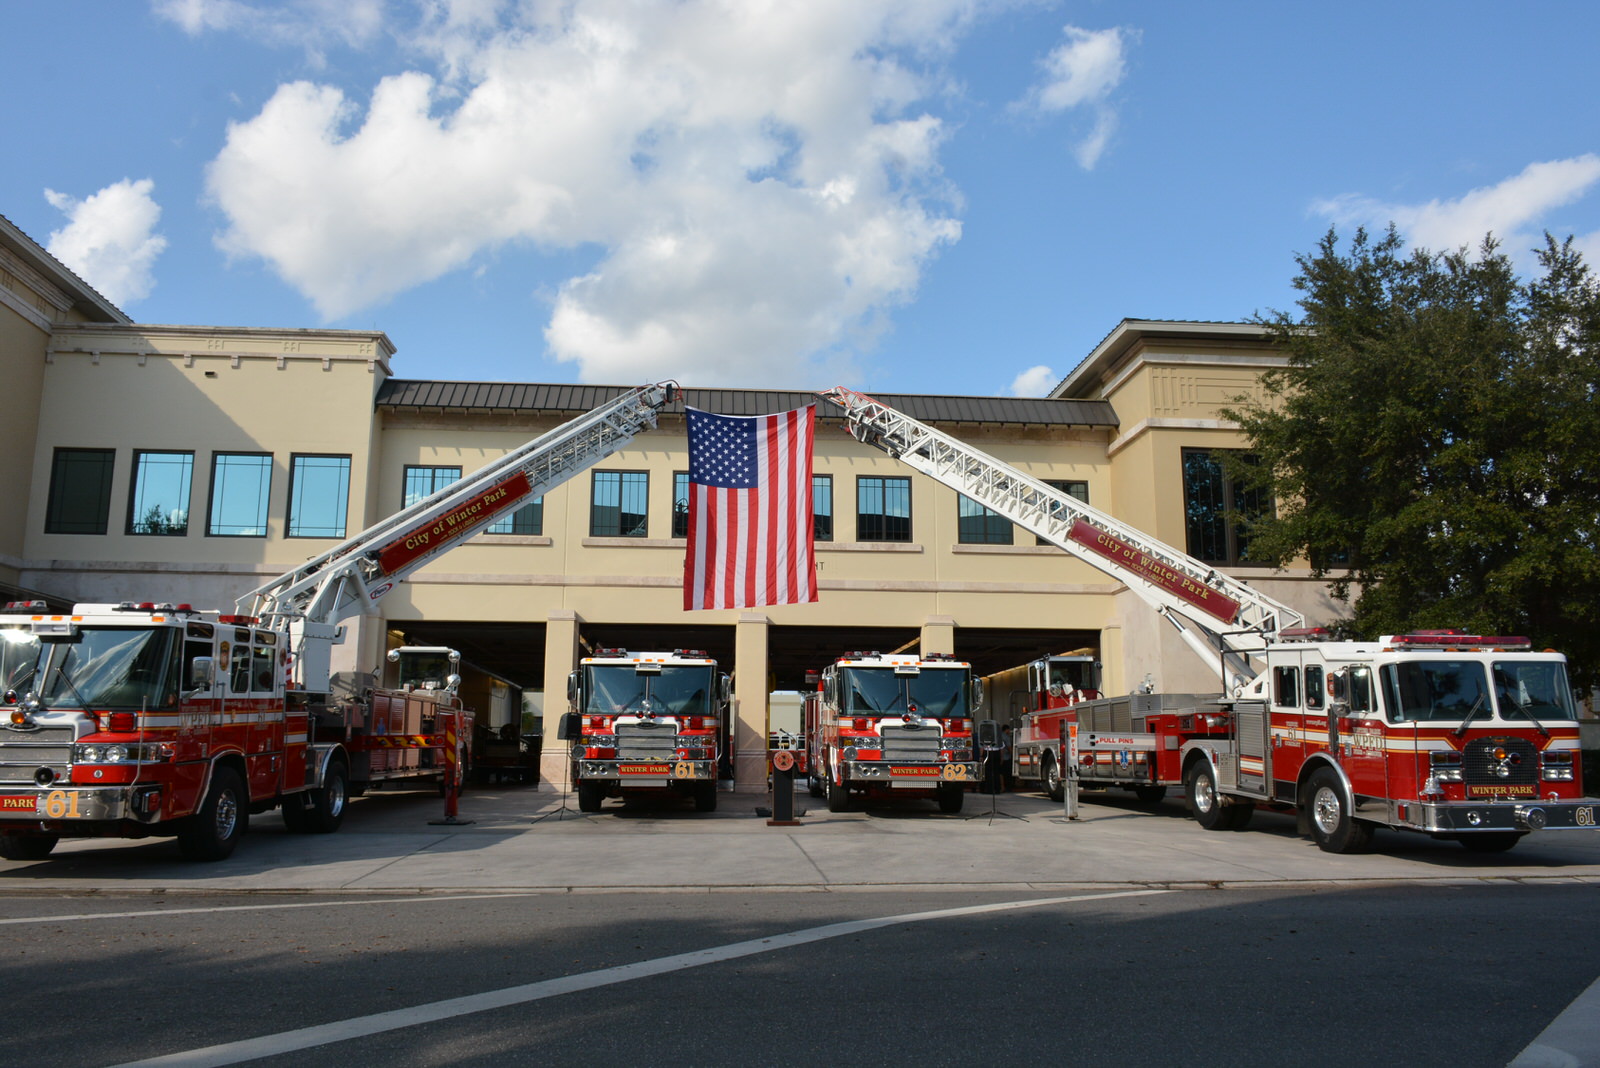 Firetrucks lined up outside the Winter Park Fire-Rescue station.